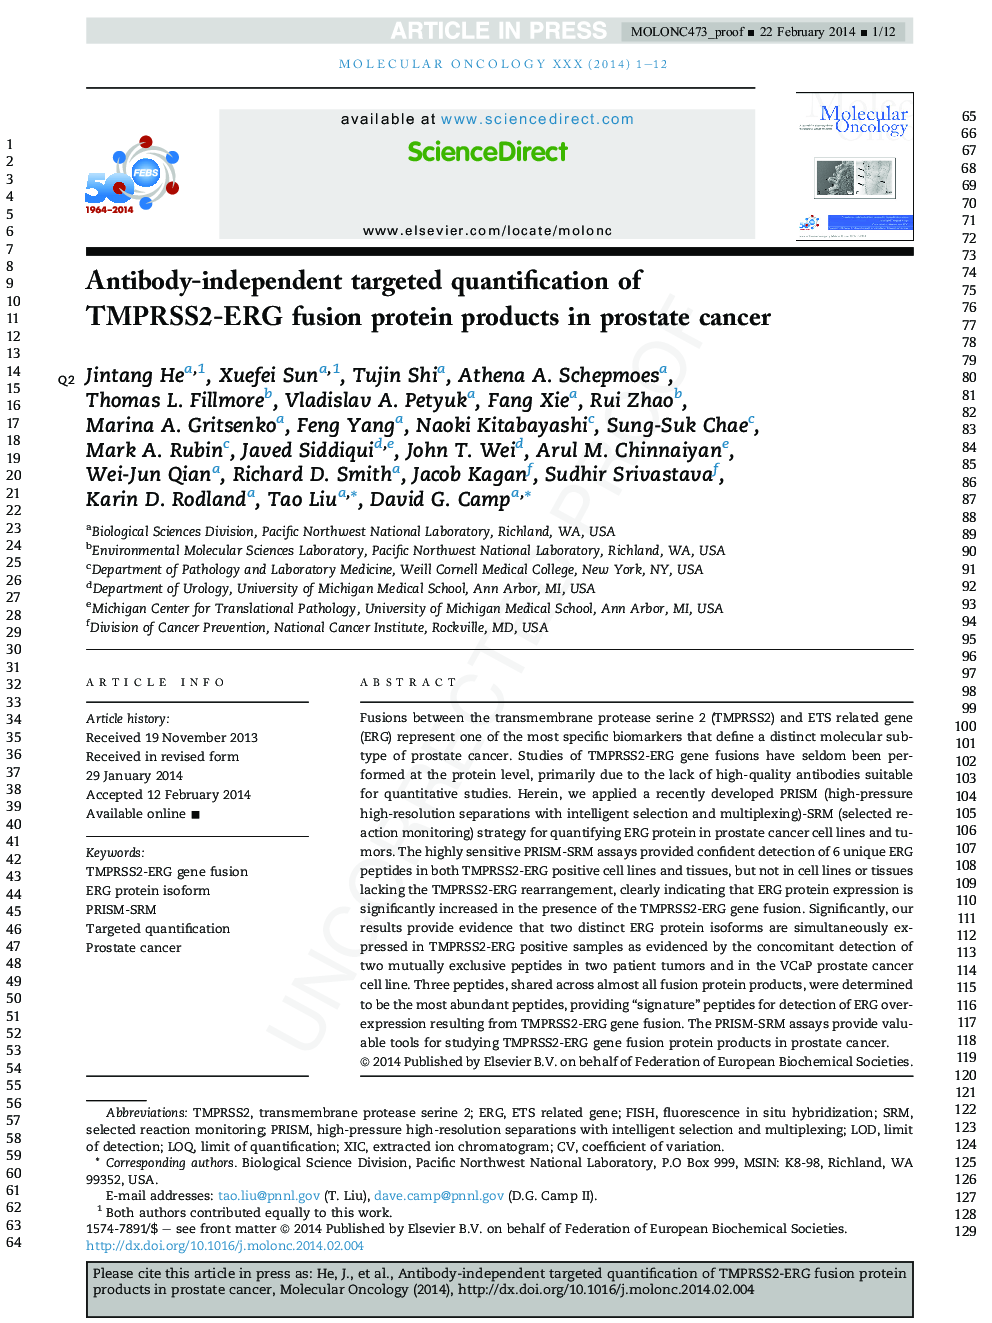 Antibody-independent targeted quantification of TMPRSS2-ERG fusion protein products in prostate cancer